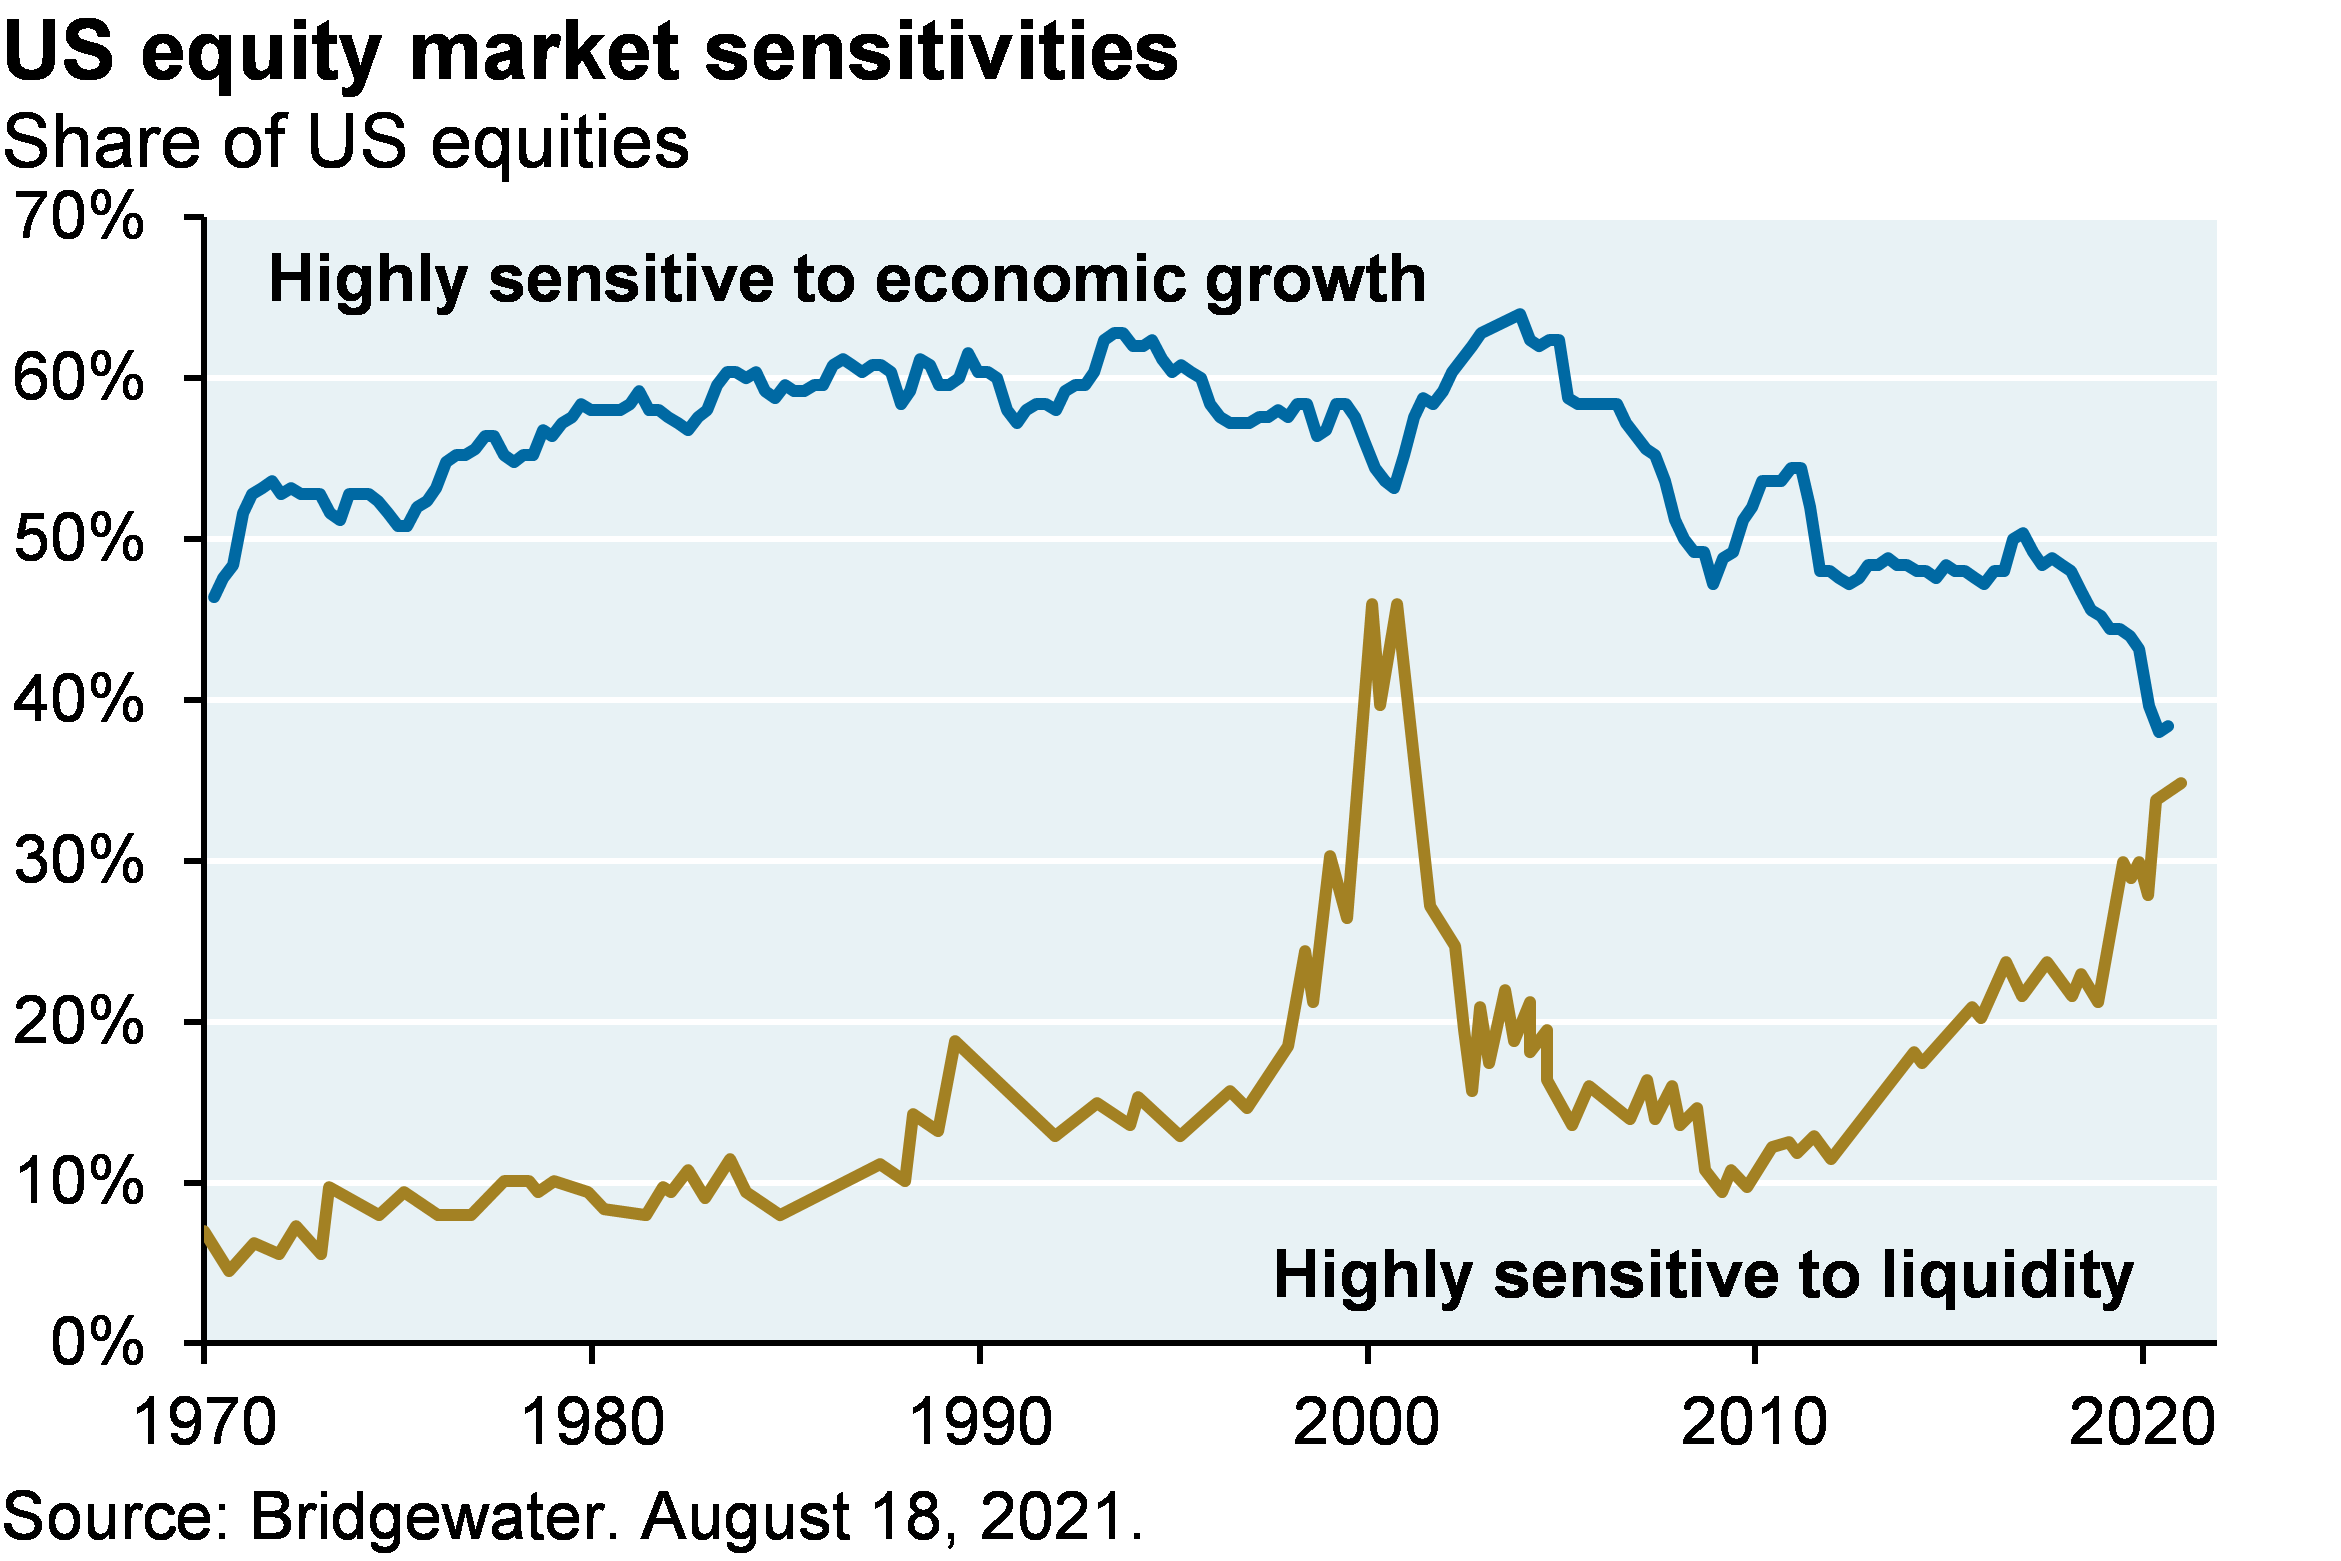 Line chart shows US equity market sensitivities since 1970, shown as the share of US equities. Line chart shows that over 50% of US equities were highly sensitive to economic growth from 1970, but the share began declining in the early 2000s to its most recent level of just under 40%. The chart also shows the share of US equities highly sensitive to liquidity, which steadily increased from around 5% in 1970 to 15% in the late 1990s, then spiked to 45% in 2000 but declined to 20% by the early 2000s. Since 2010, the share of US equities highly sensitive to liquidity has risen steadily from its 2010 level of 10% to its most recent level of around 35%.